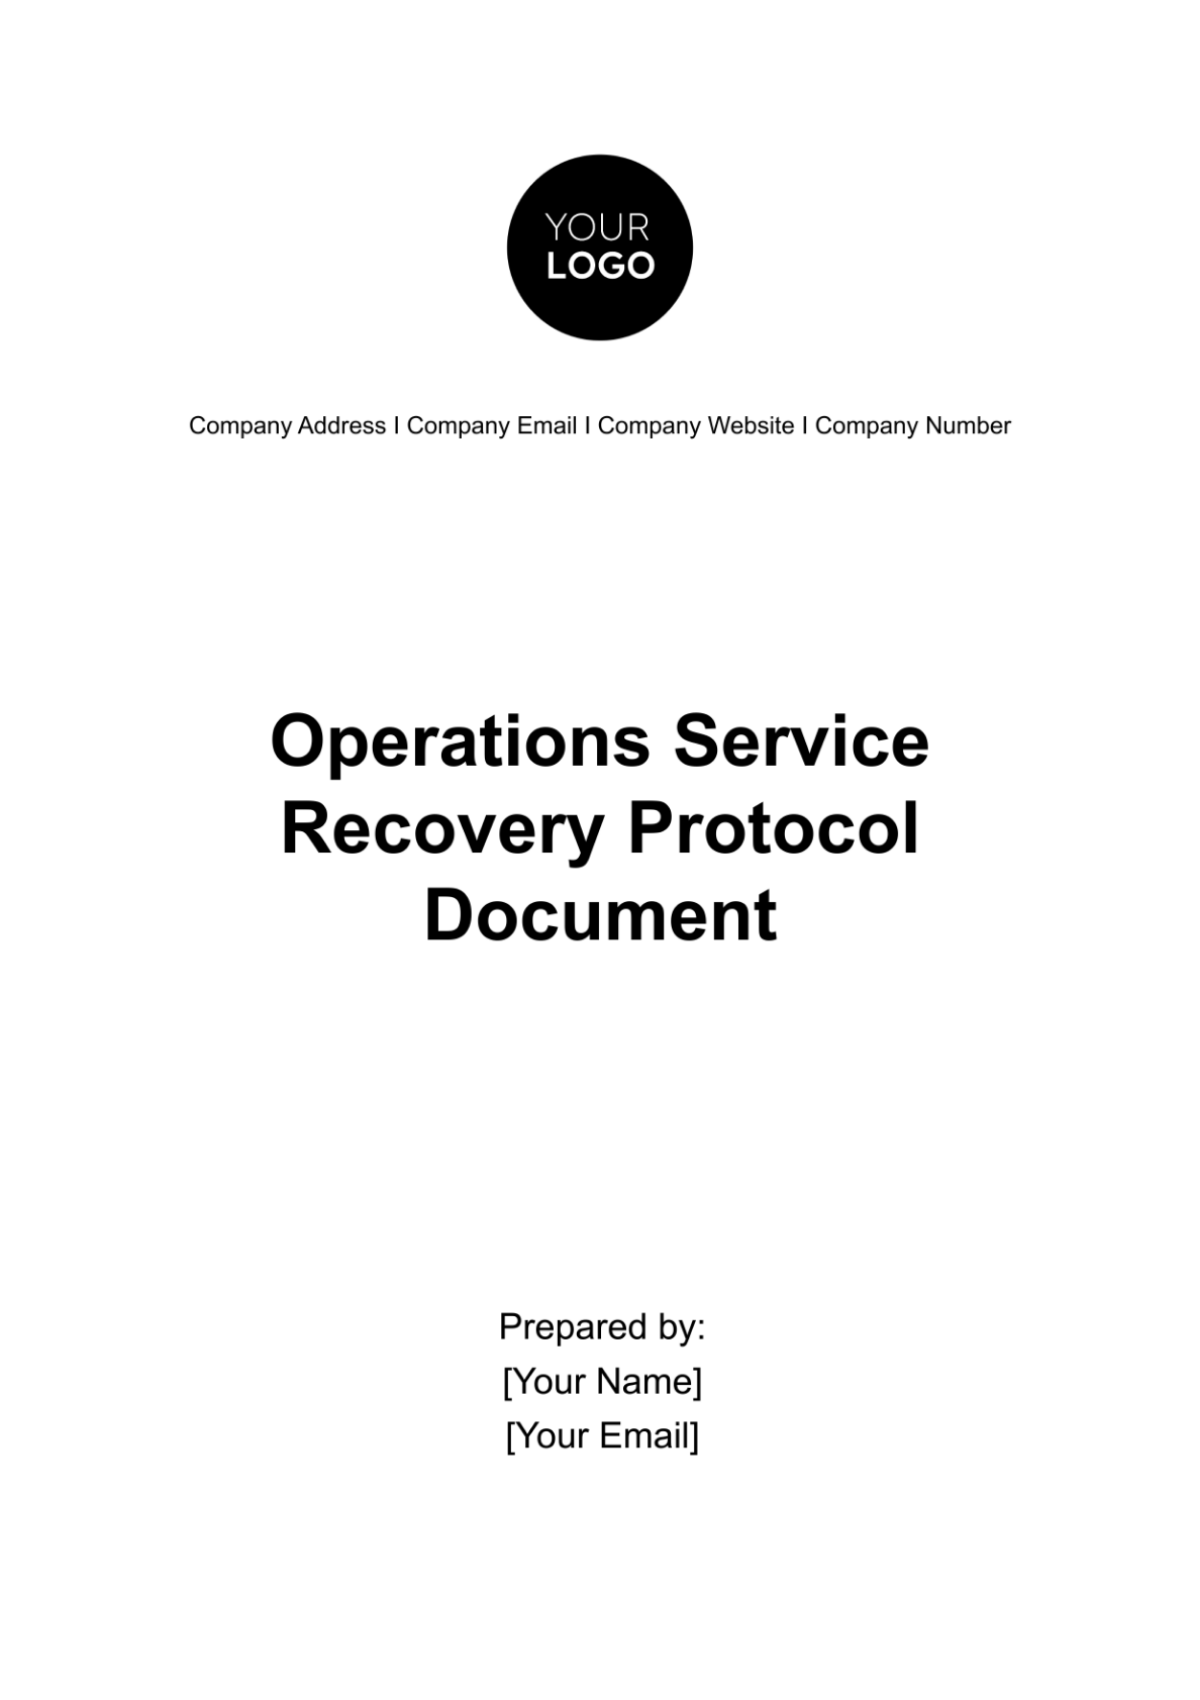 Operations Service Recovery Protocol Document Template